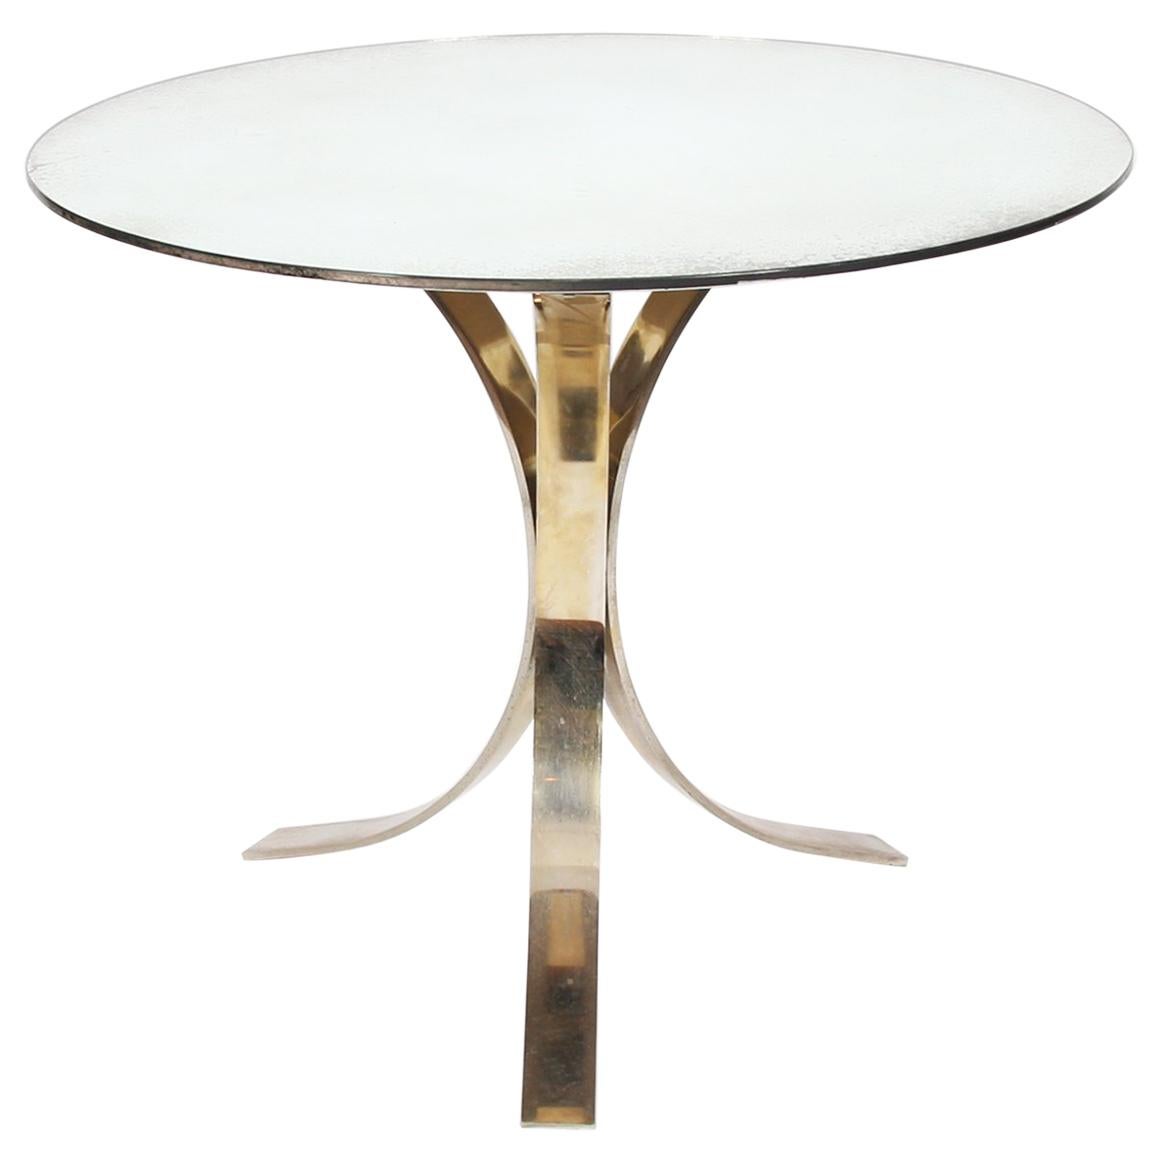 1970s French Round Mirrored Glass Centre Table